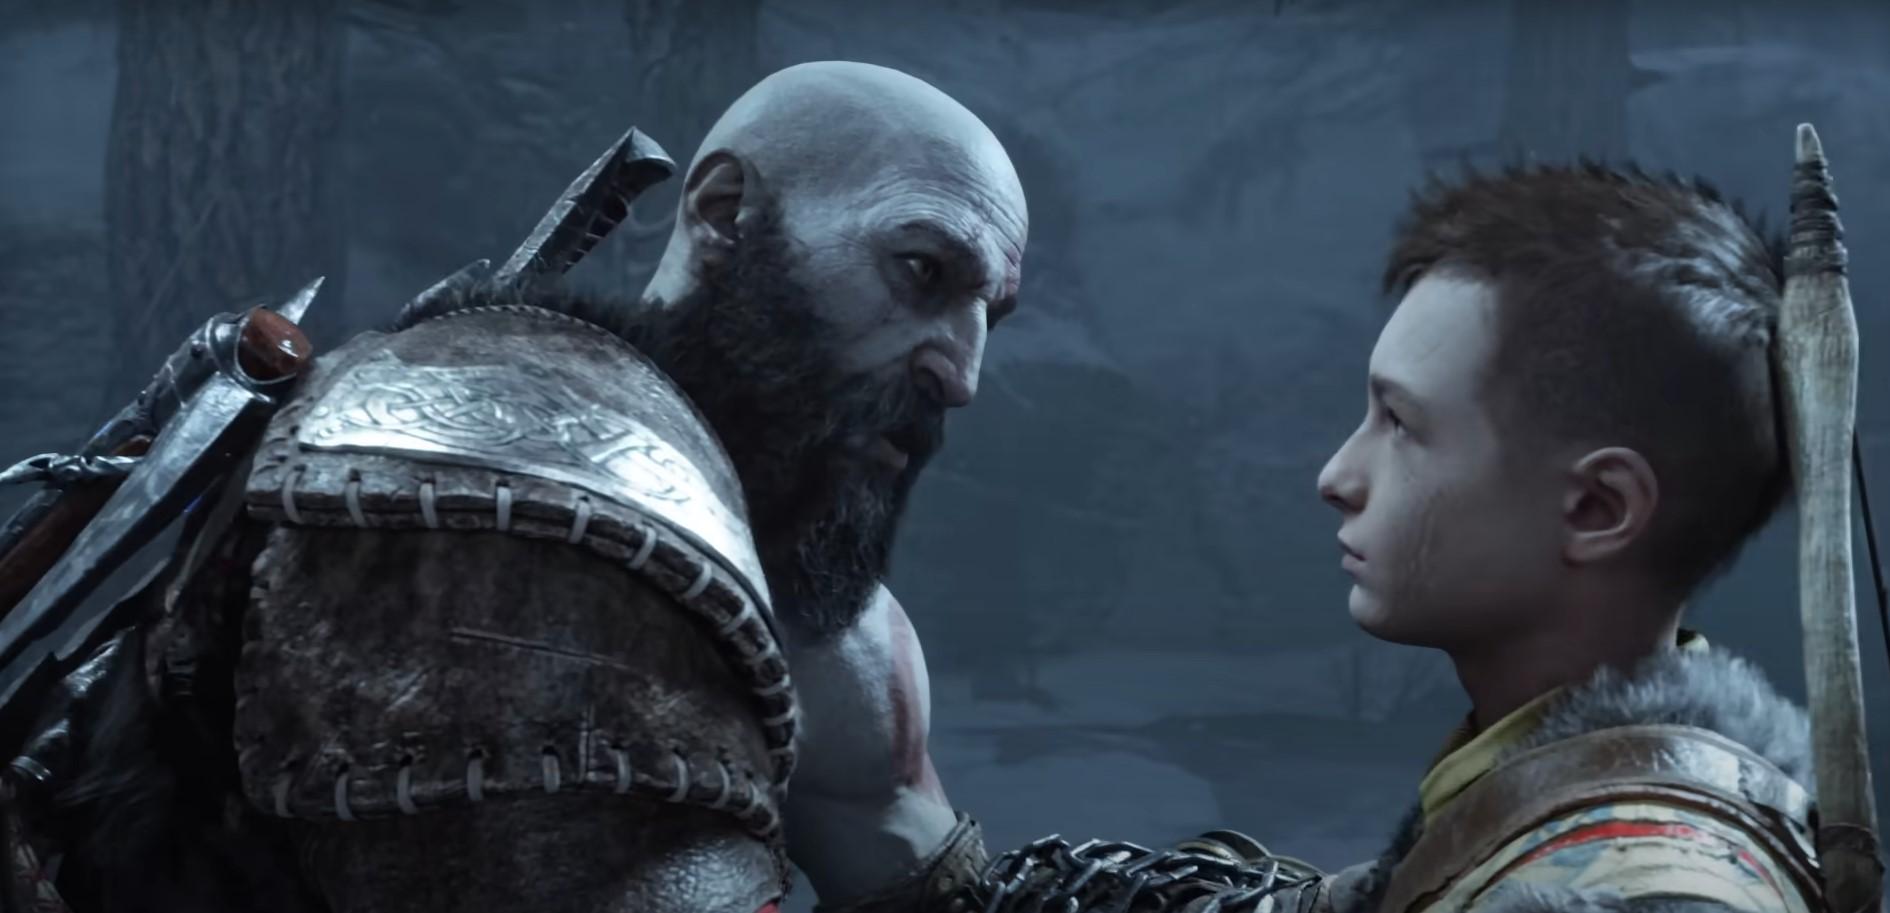 All The God Of War 2 Rumors And Spoilers Leaked So Far